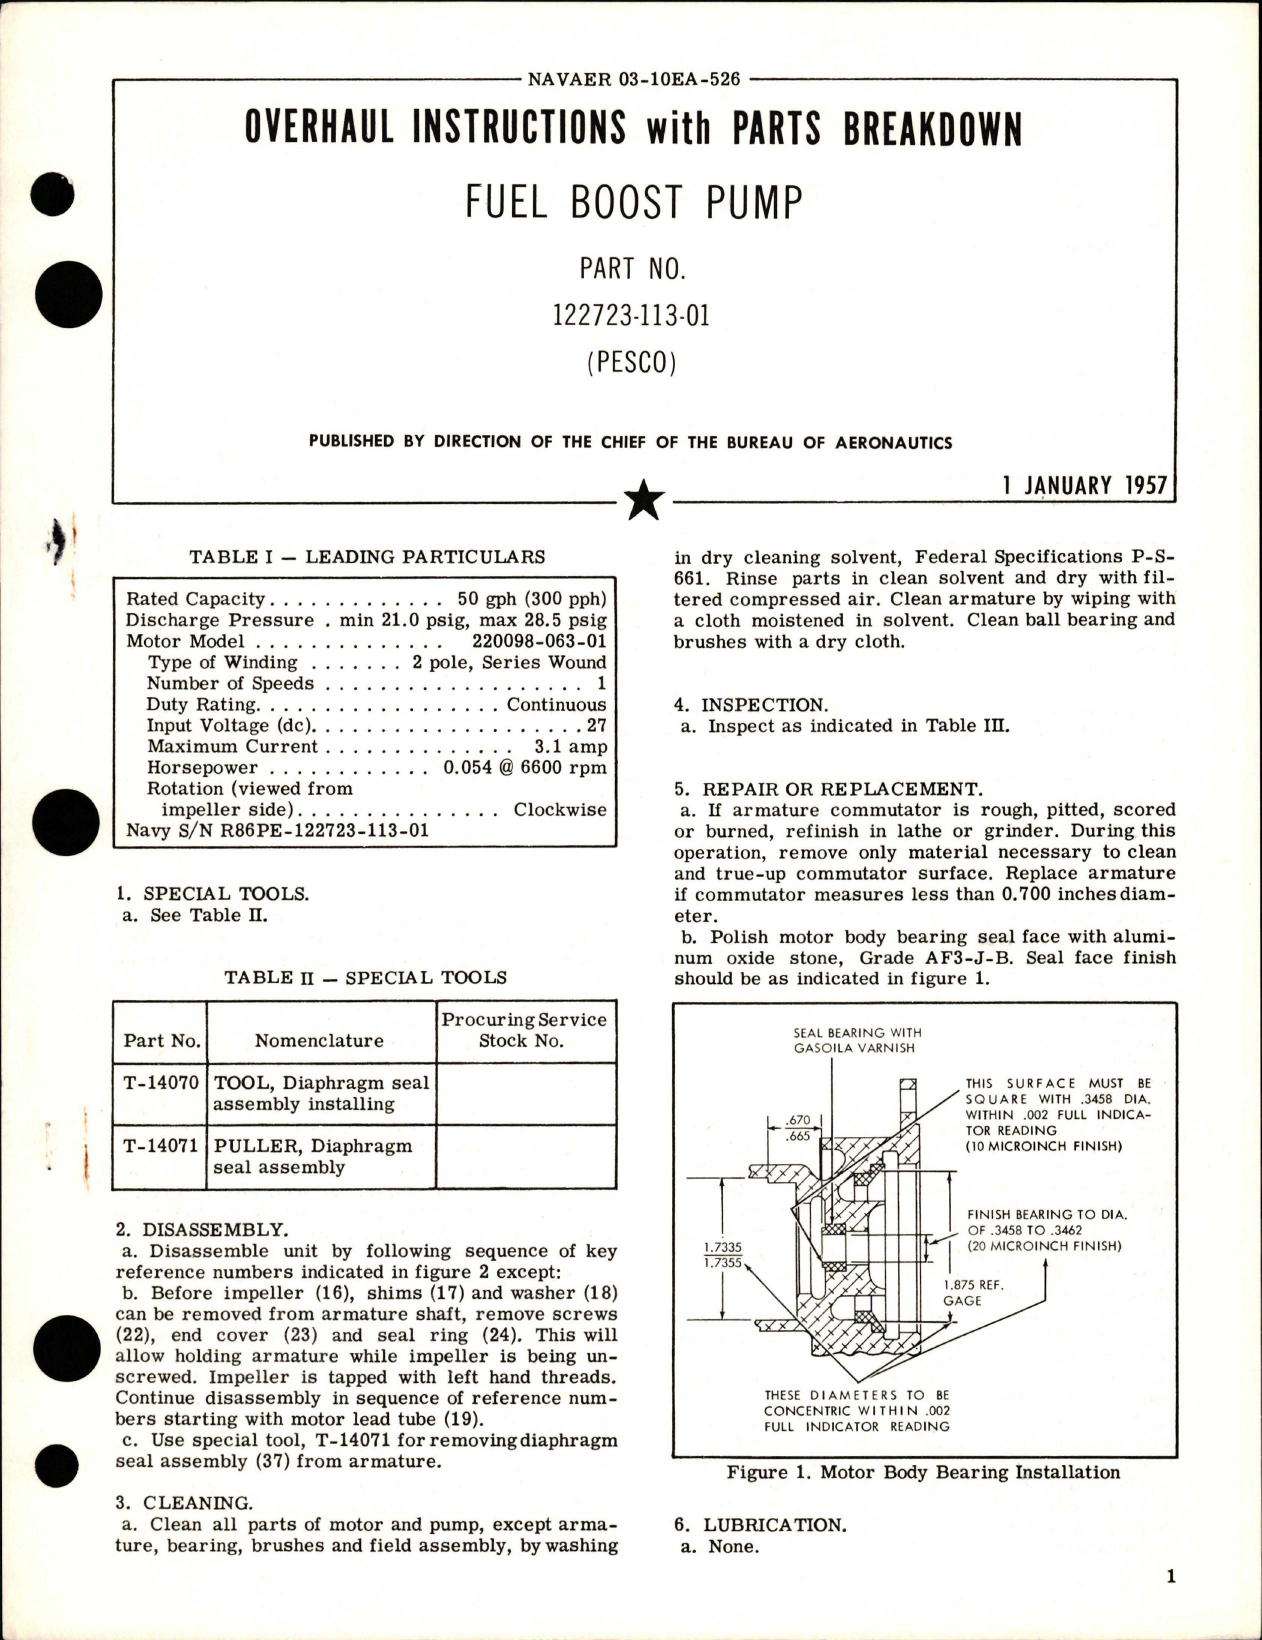 Sample page 1 from AirCorps Library document: Overhaul Instructions with Parts Breakdown for Fuel Boost Pump - Part 122723-113-01